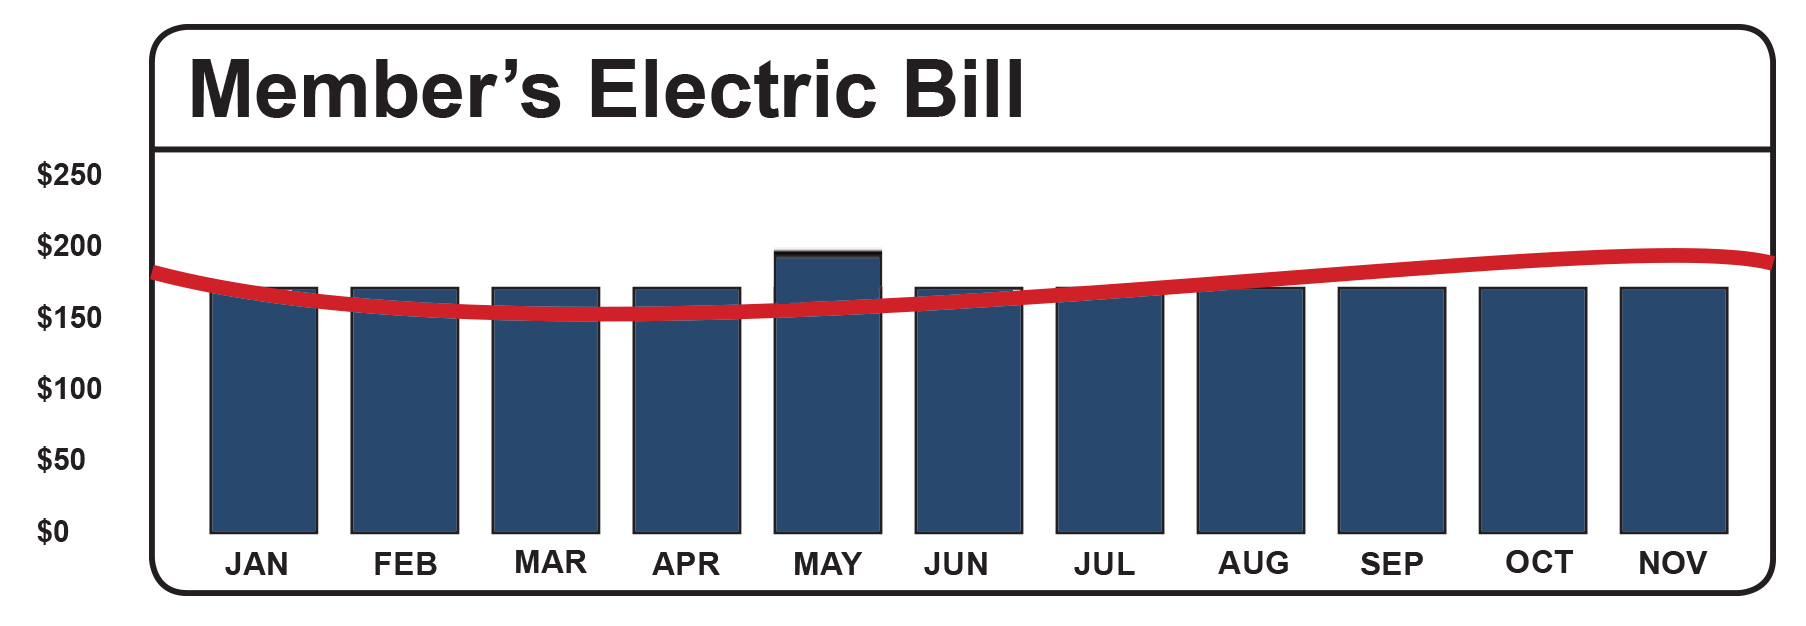 A chart that shows how a member's electric bill stays relatively the same on a month to month basis.